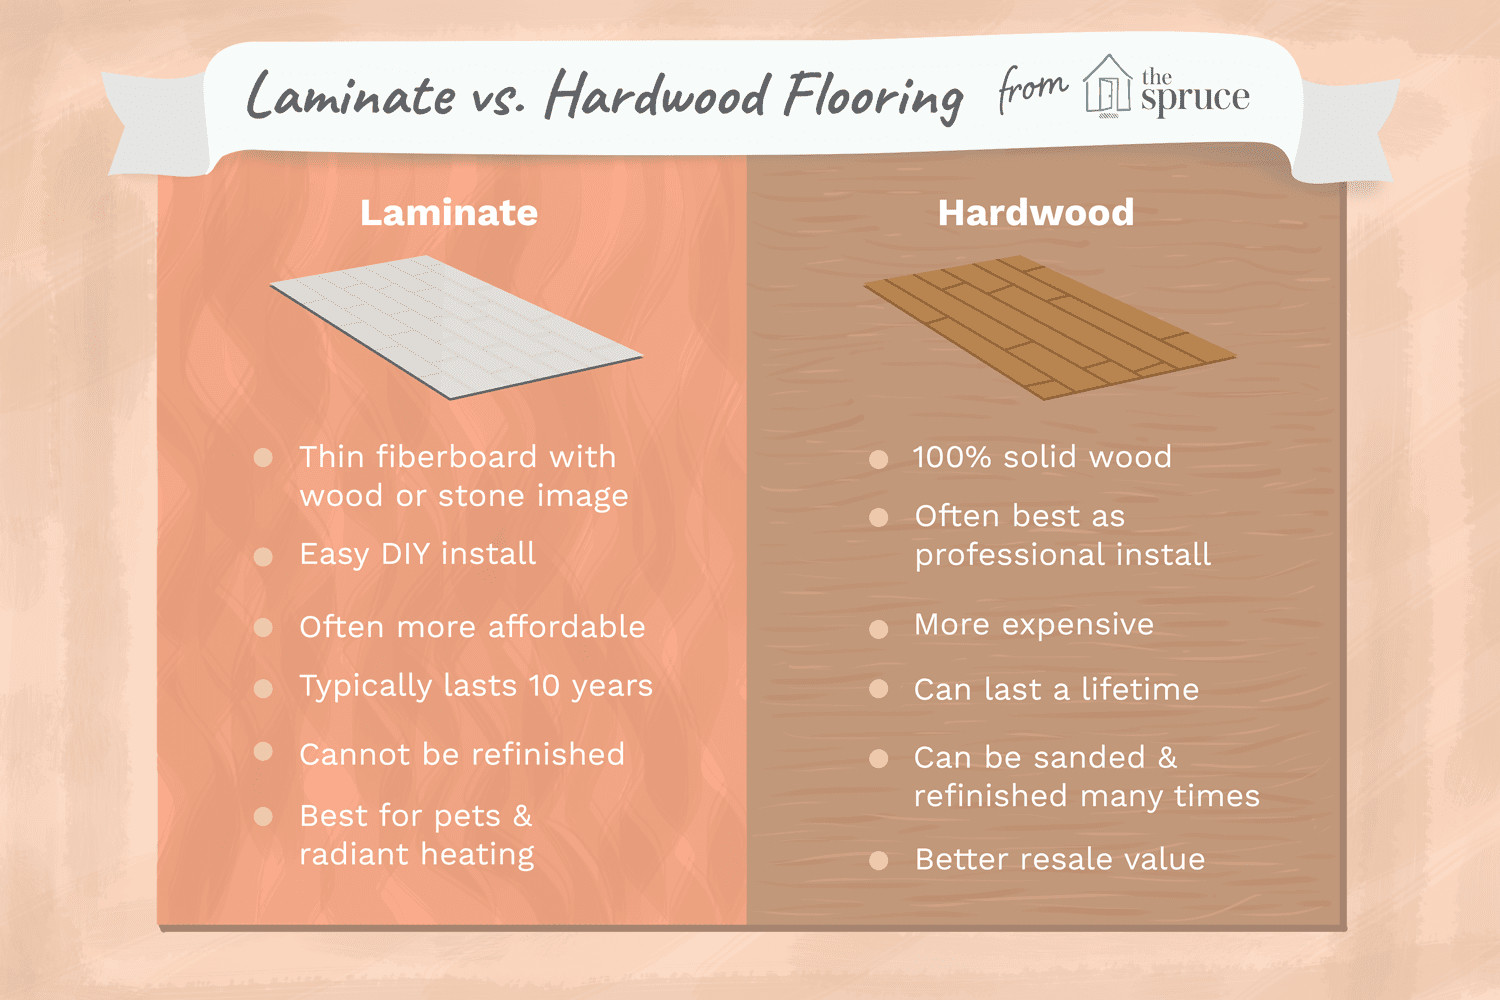 11 Perfect Oak or Maple Hardwood Floors which is Better 2024 free download oak or maple hardwood floors which is better of laminate vs hardwood doesnt have to be a hard decision for hardwood doesnt have to be a hard decision